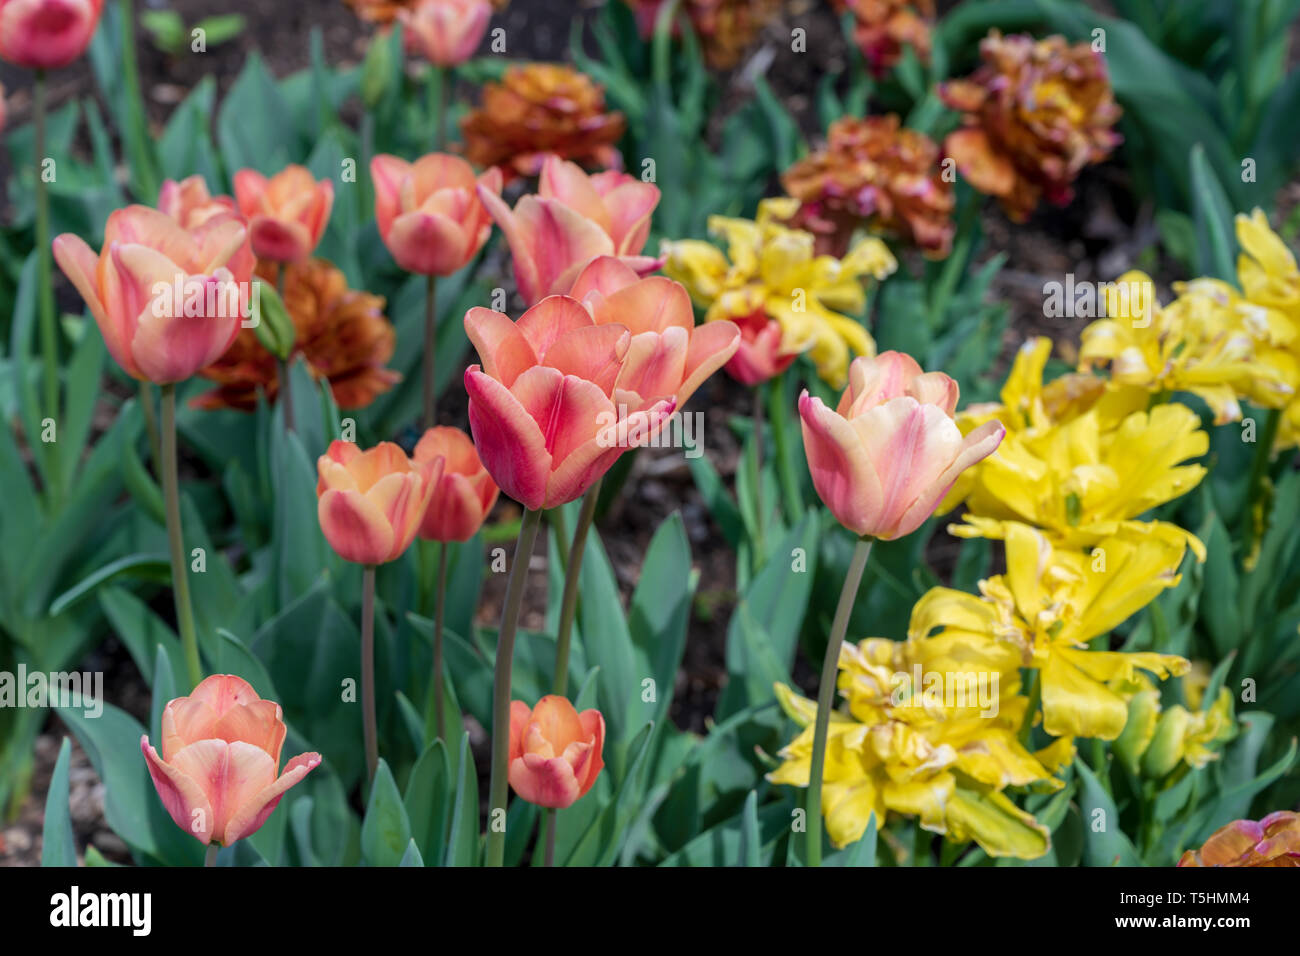 Photo of Tulips Sprengeri among green stems and hibiscus flowers in a garden Stock Photo